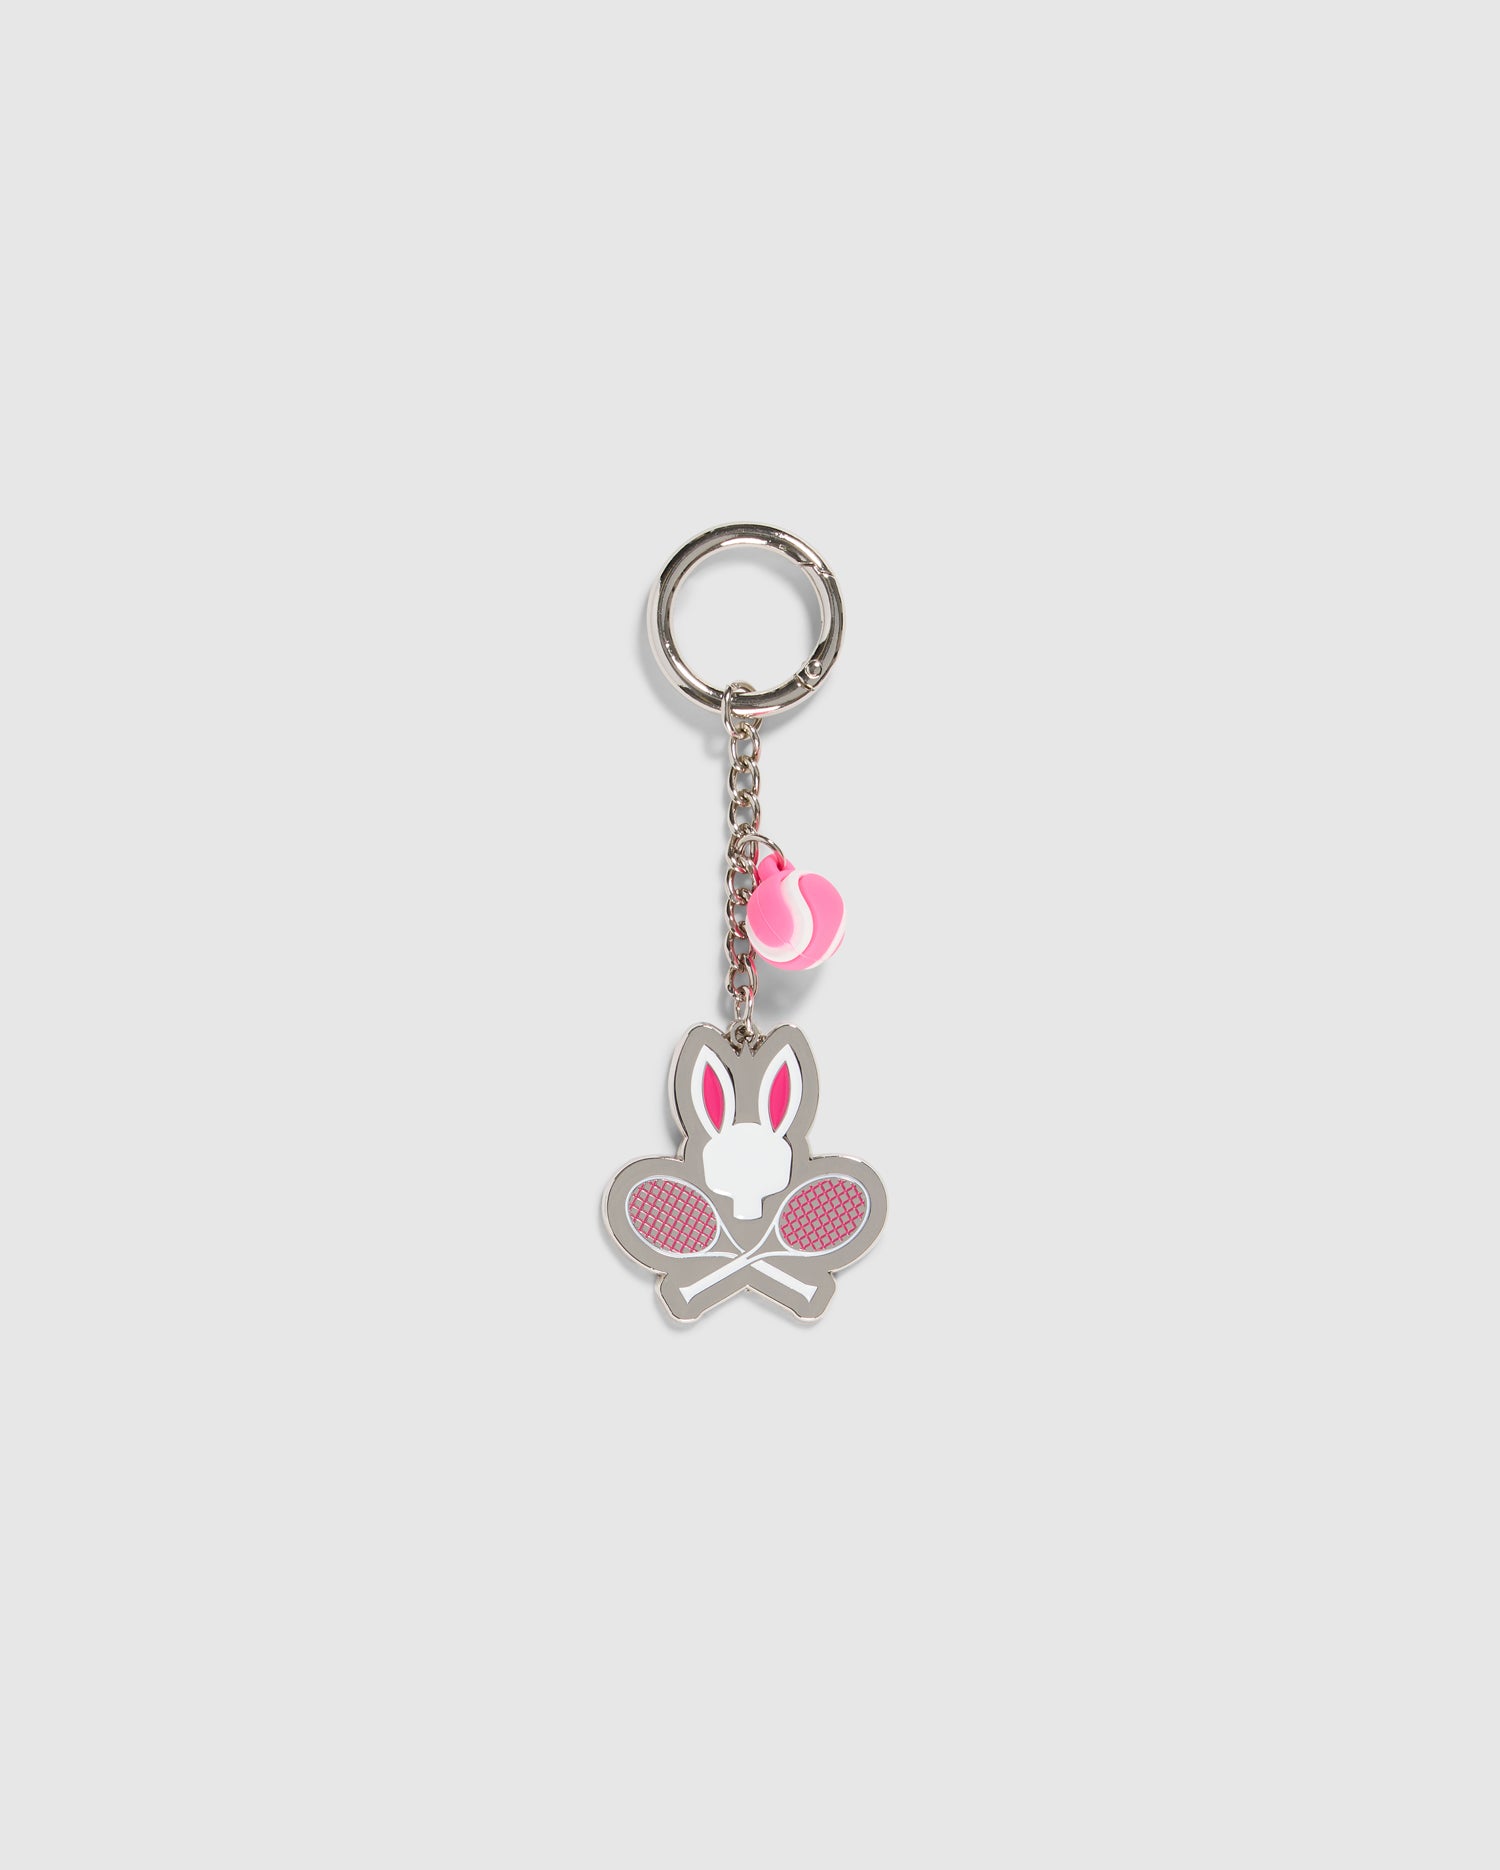 A Psycho Bunny TENNIS KEYCHAIN - B6A657C200 featuring a silver ring connected to a chain. At the end, there's a charm with a stylized rabbit head above two crossed tennis rackets in white and pink. Another small pink tennis ball charm is also attached to the chain for added flair.